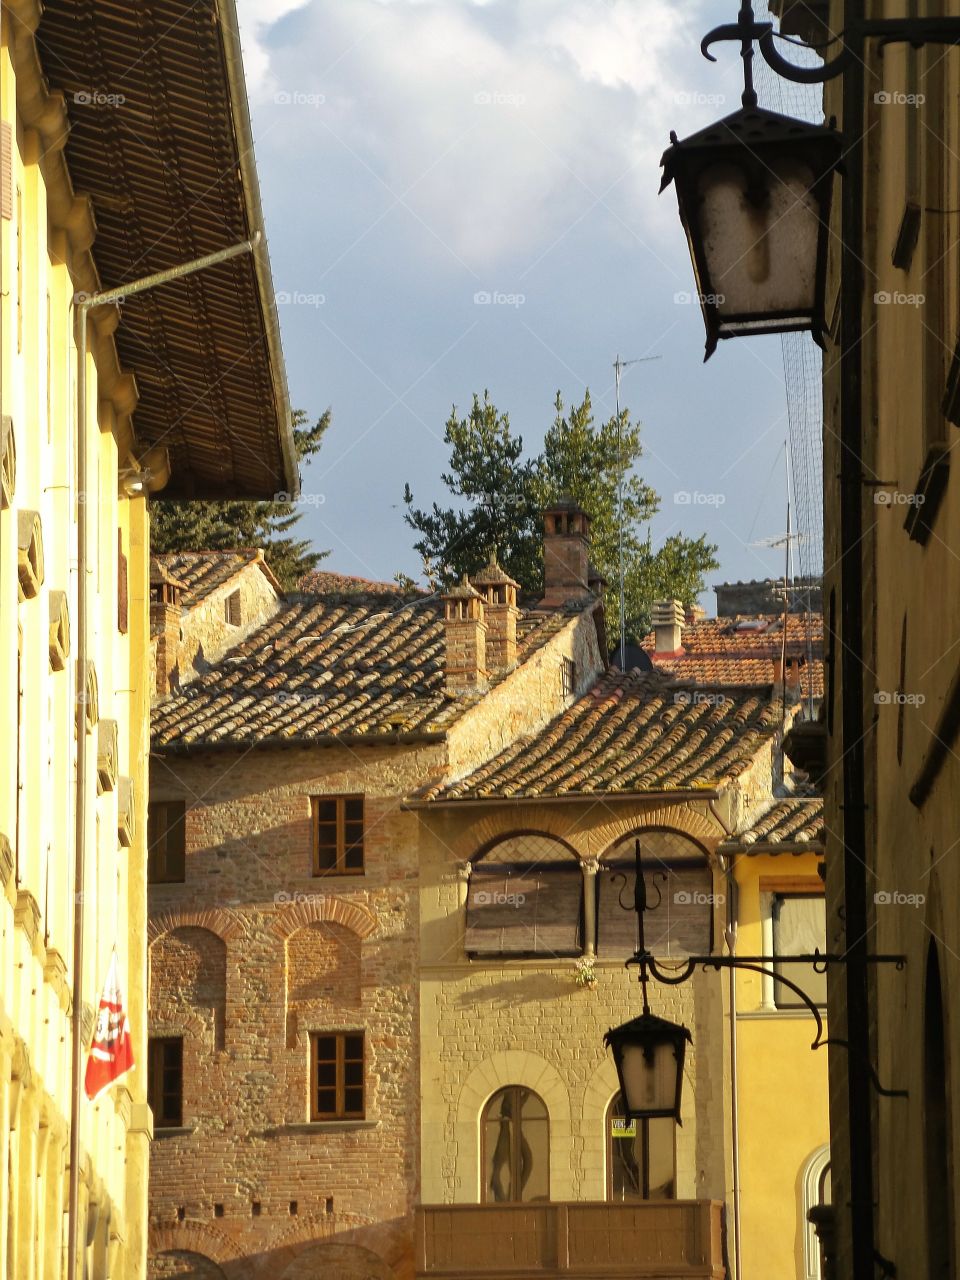 In Arezzo.... Just a fast shot of this wonderful Tuscan town...